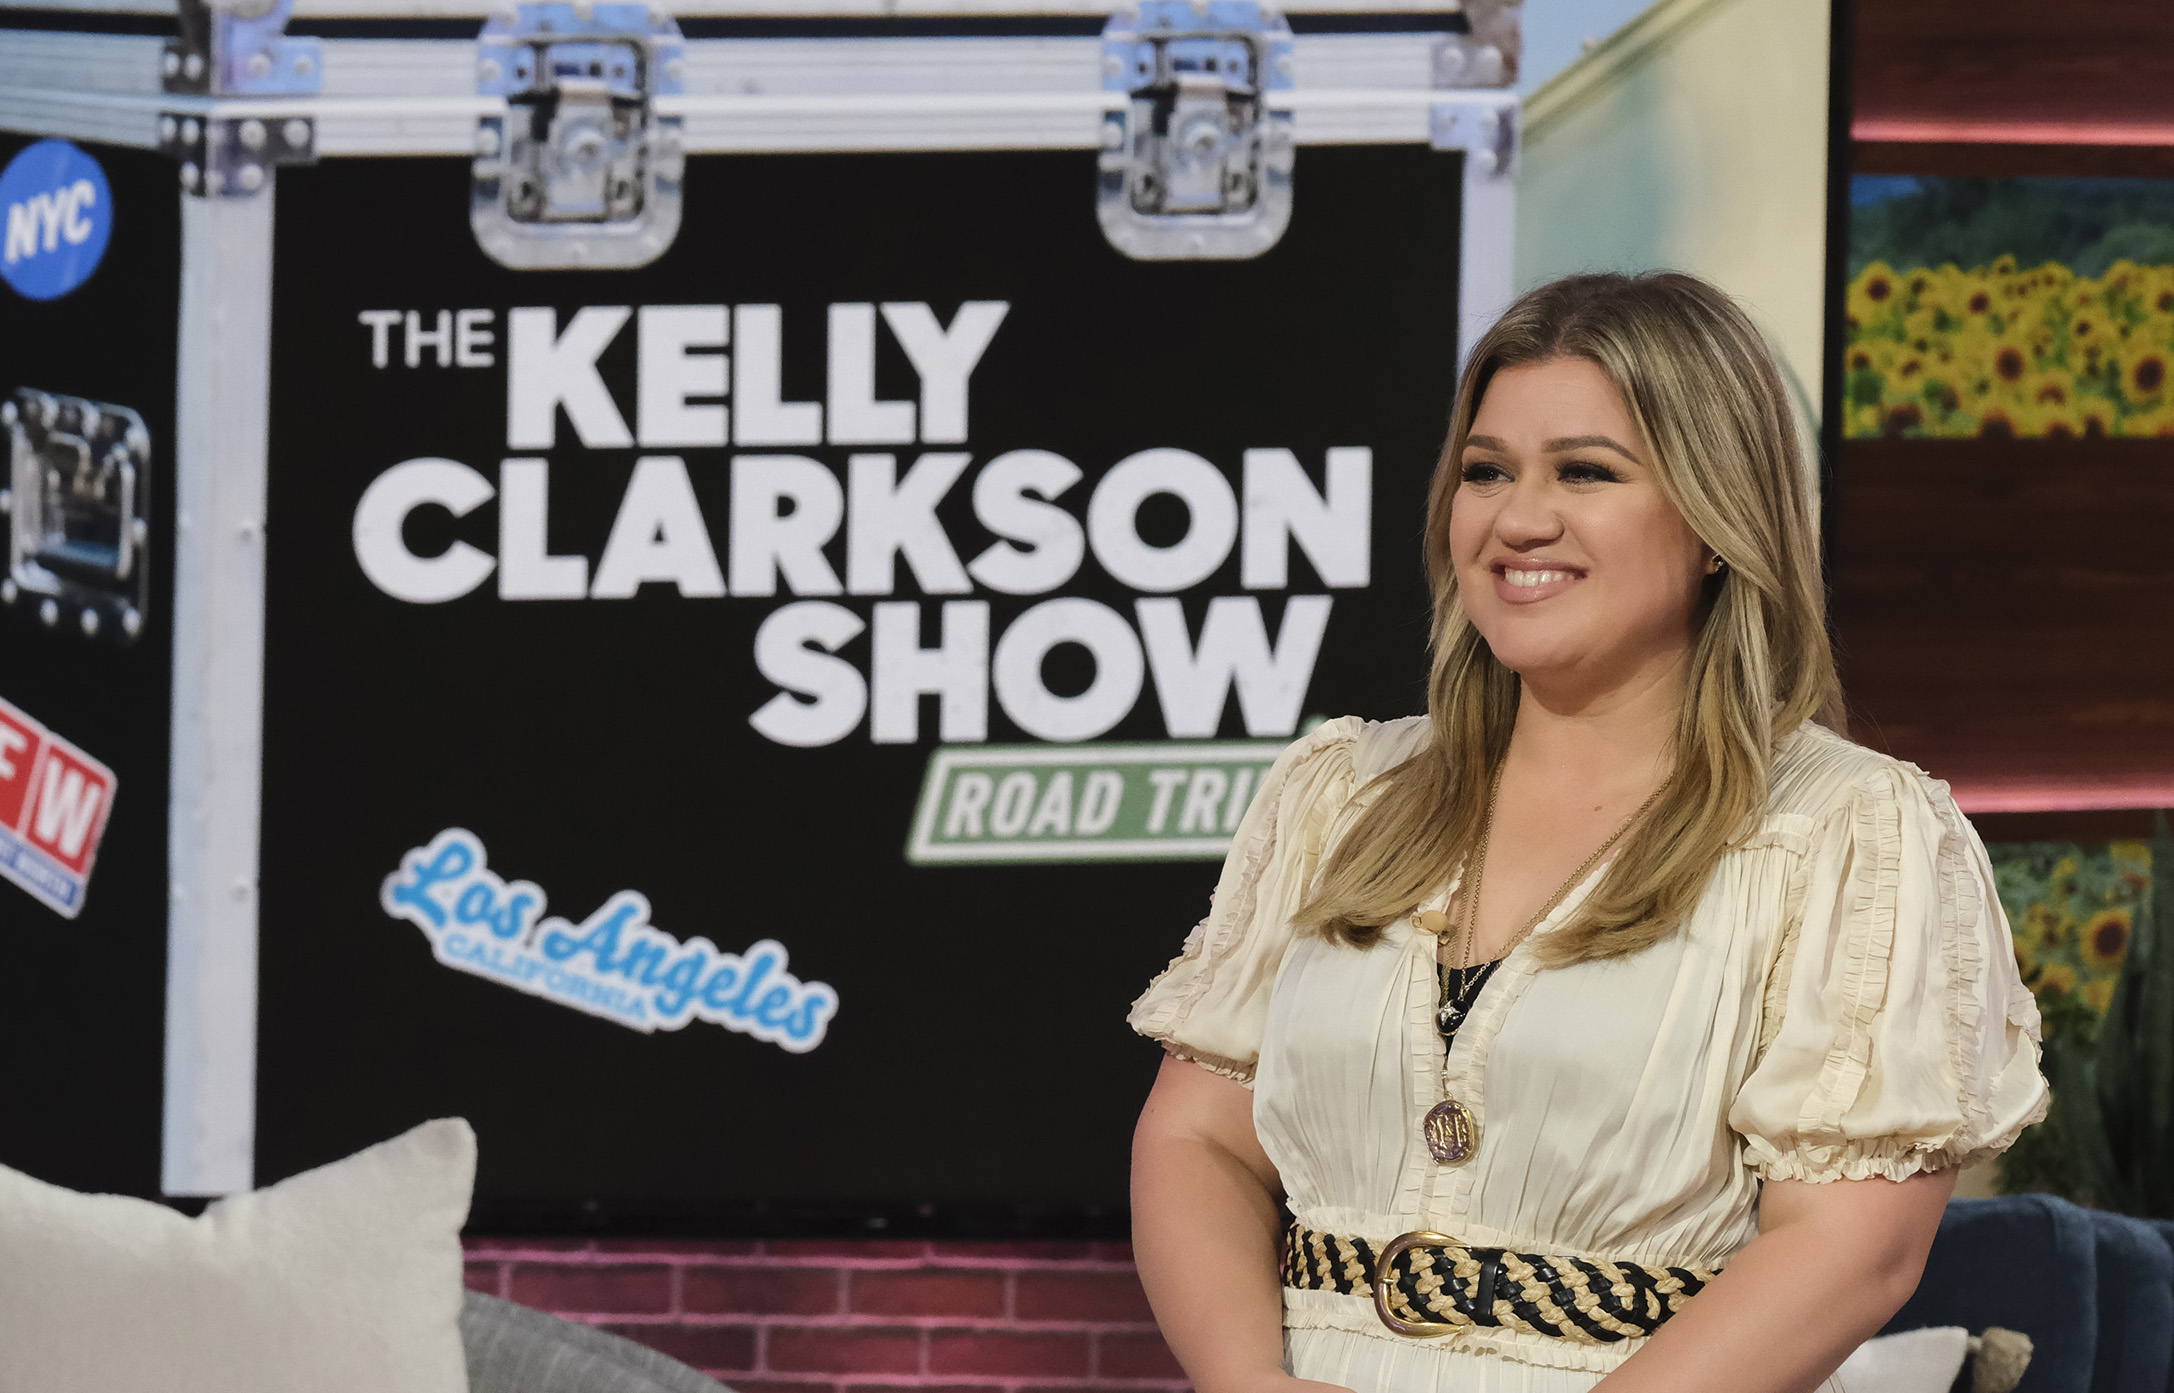 Unnamed staff members accuse ‘The Kelly Clarkson Show’ of being a toxic work environment.